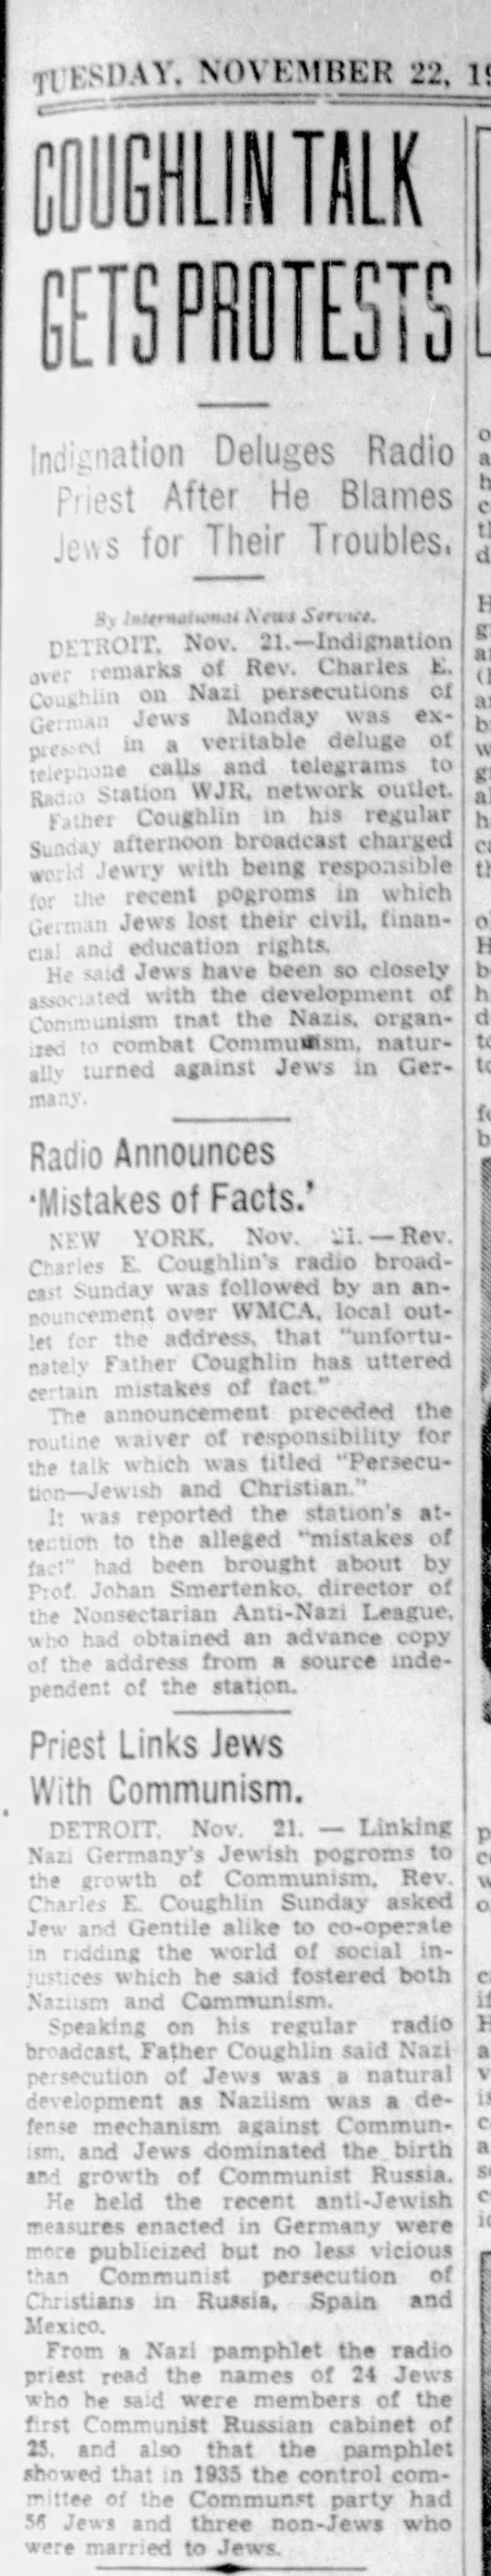 Radio Announces 'Mistakes of Facts.'